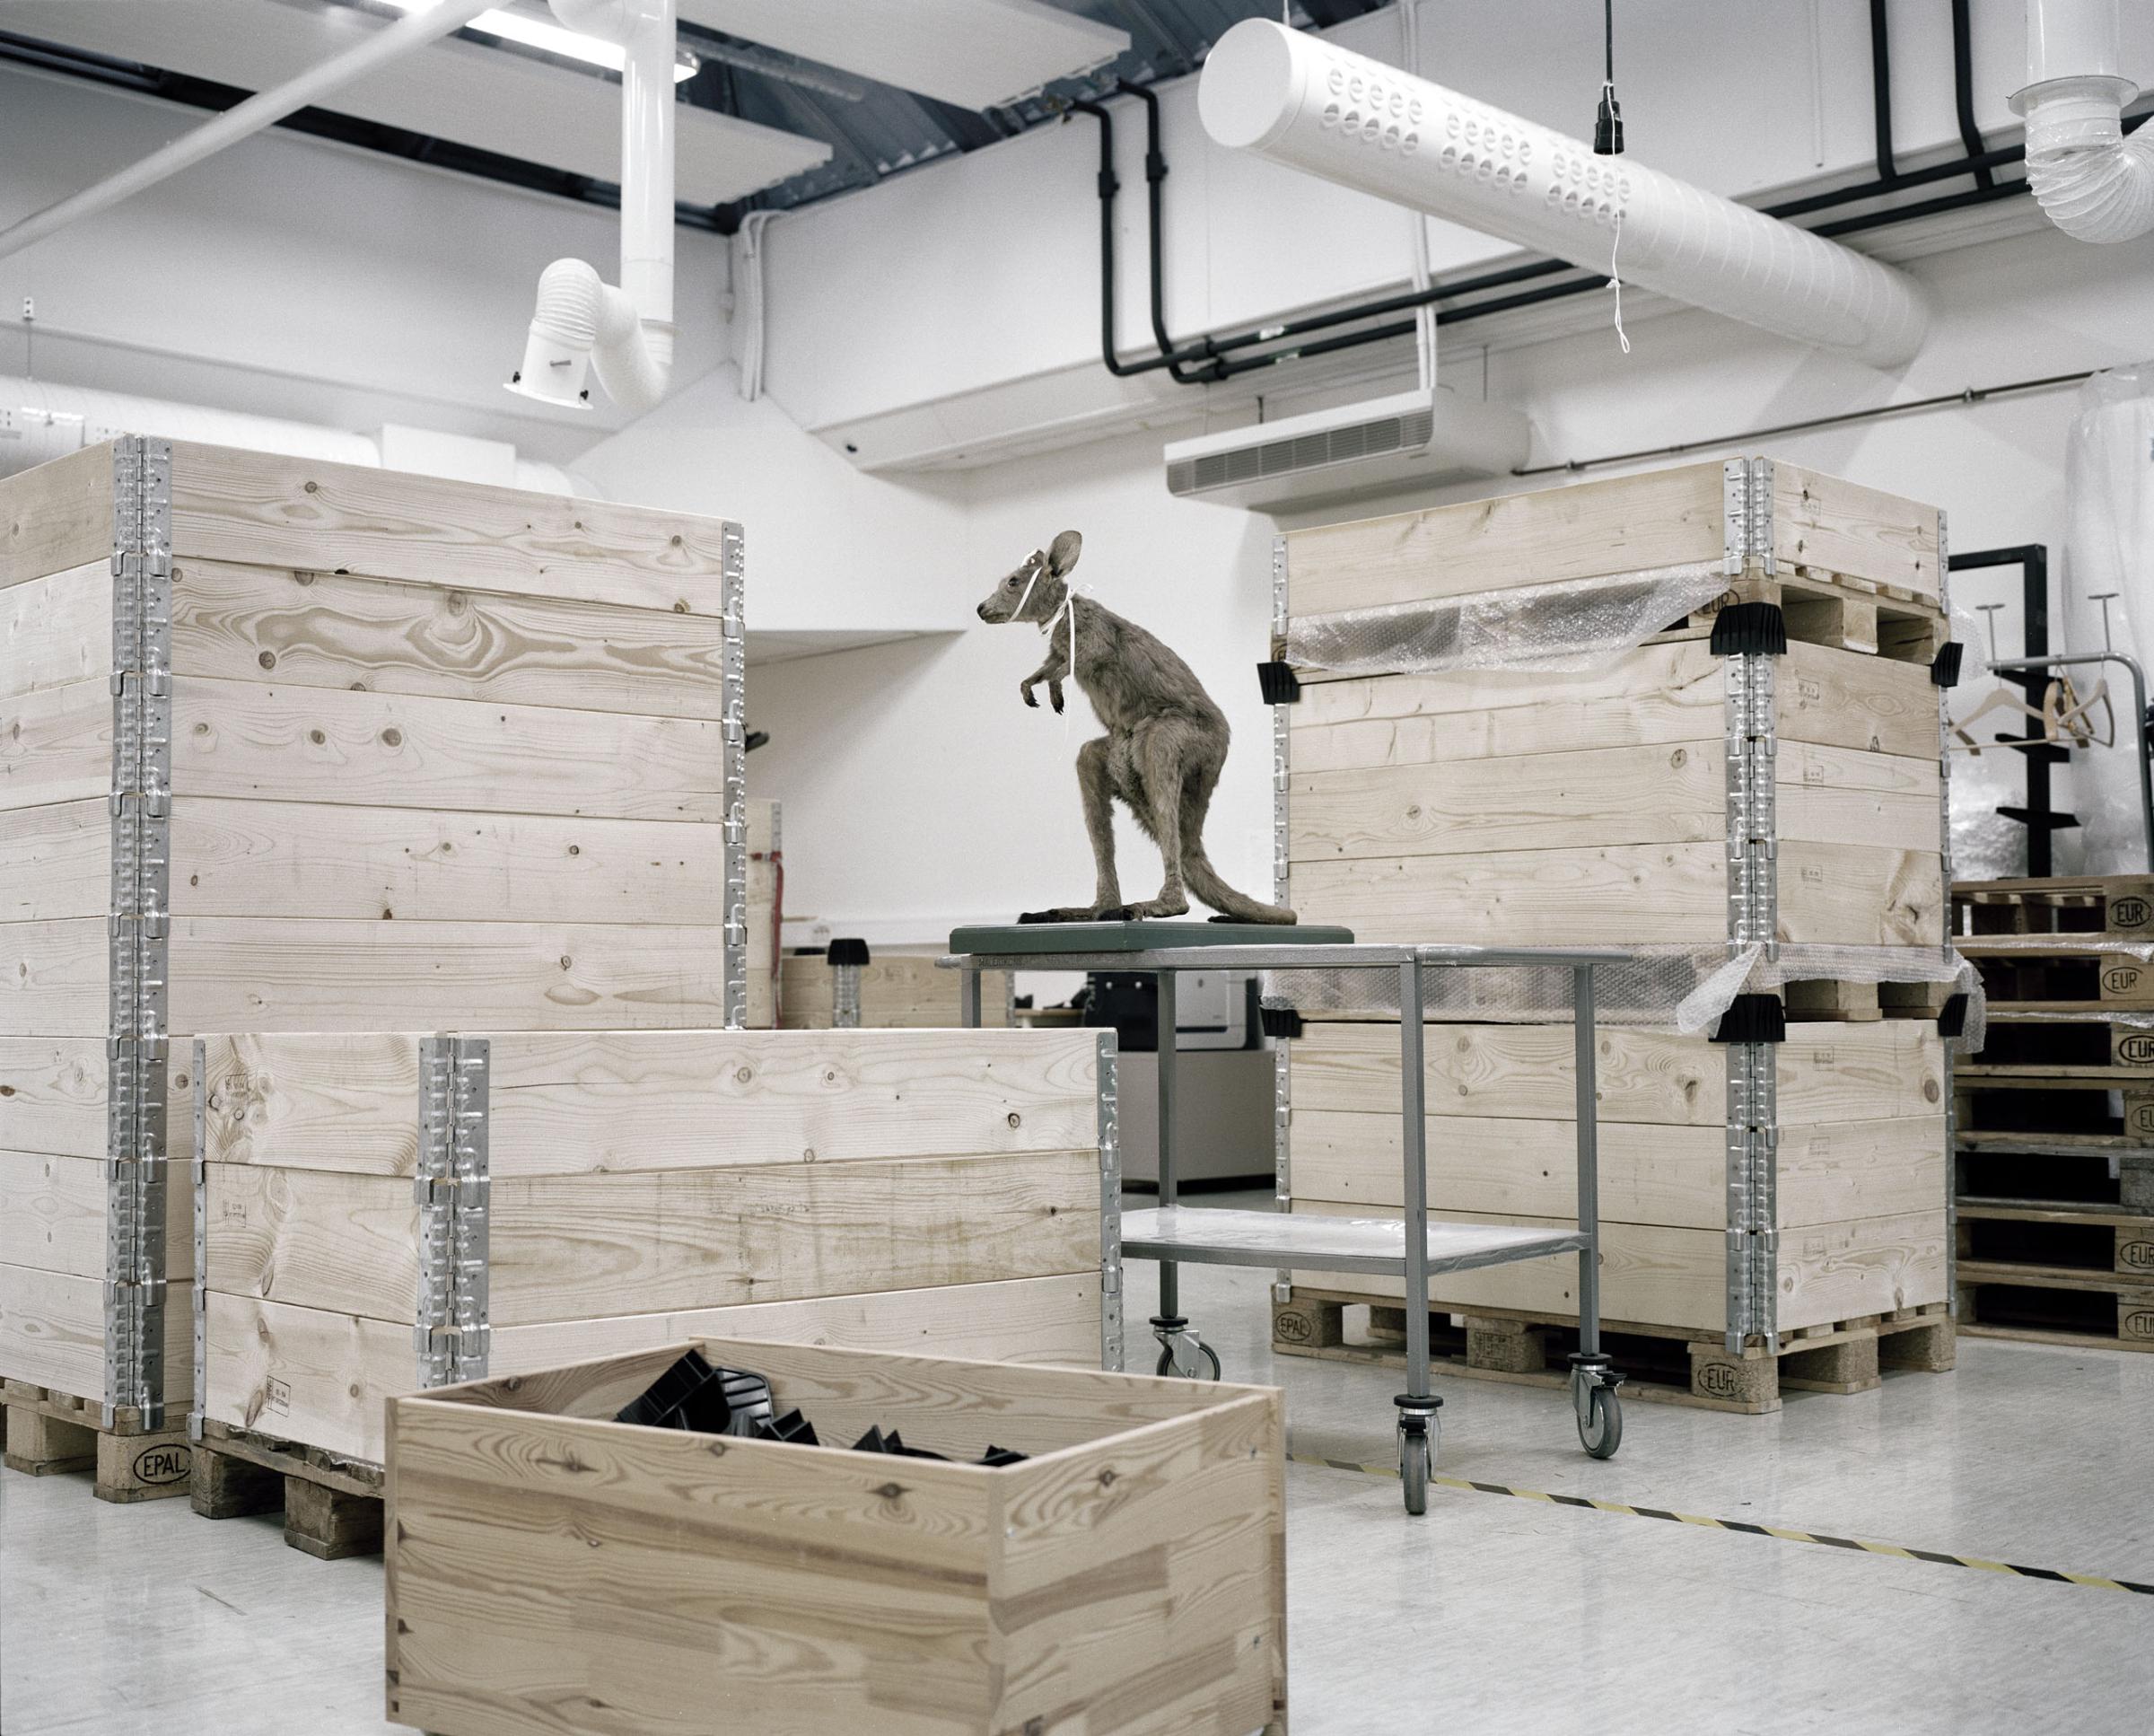 A moveable beastThe exhibitions in the Natural History Collections in Bergen, Norway are undergoing a major restoration, and will be closed for at least five years. Due to this all the animals are beeing moved to a new temporary storage facility on the